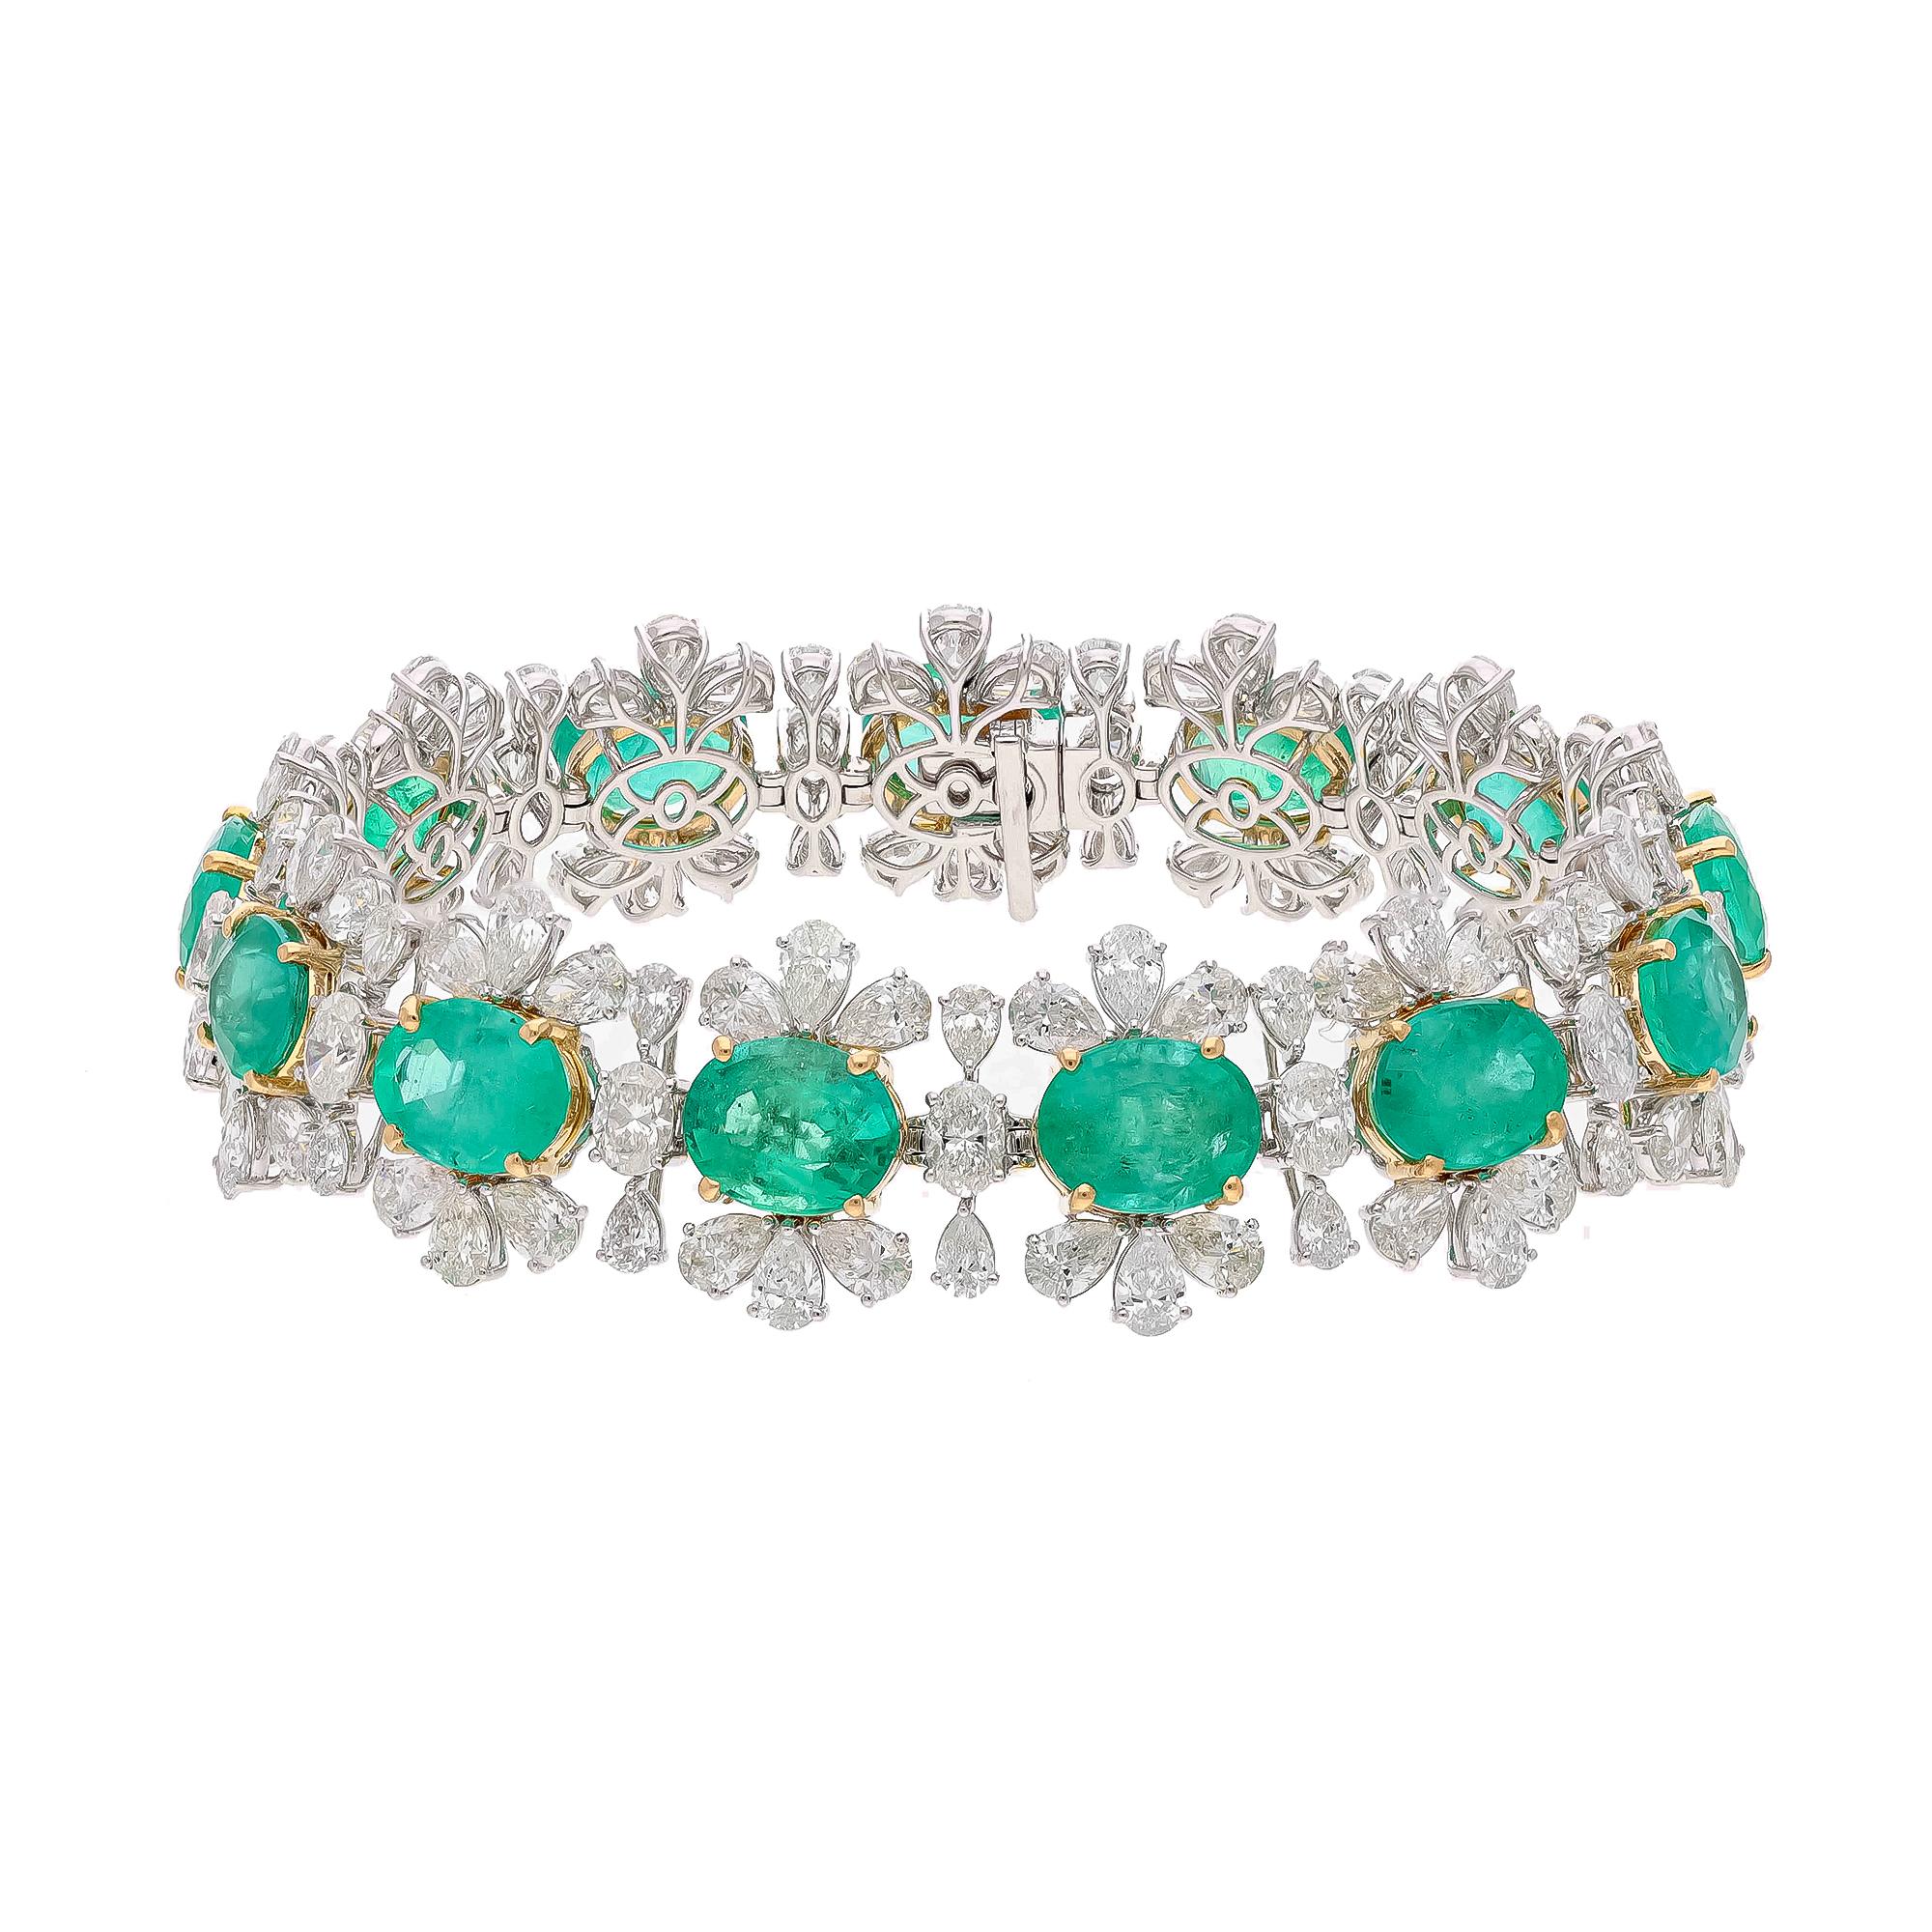 This is a stunning natural Zambian Emerald bracelet which has Emerald of very high quality and diamonds of very good quality . it has vsi clarity and G colour.

Emerald : 25.43 cts

diamonds : 15.70 cts ( good size pears and ovals )

gold : 23.704